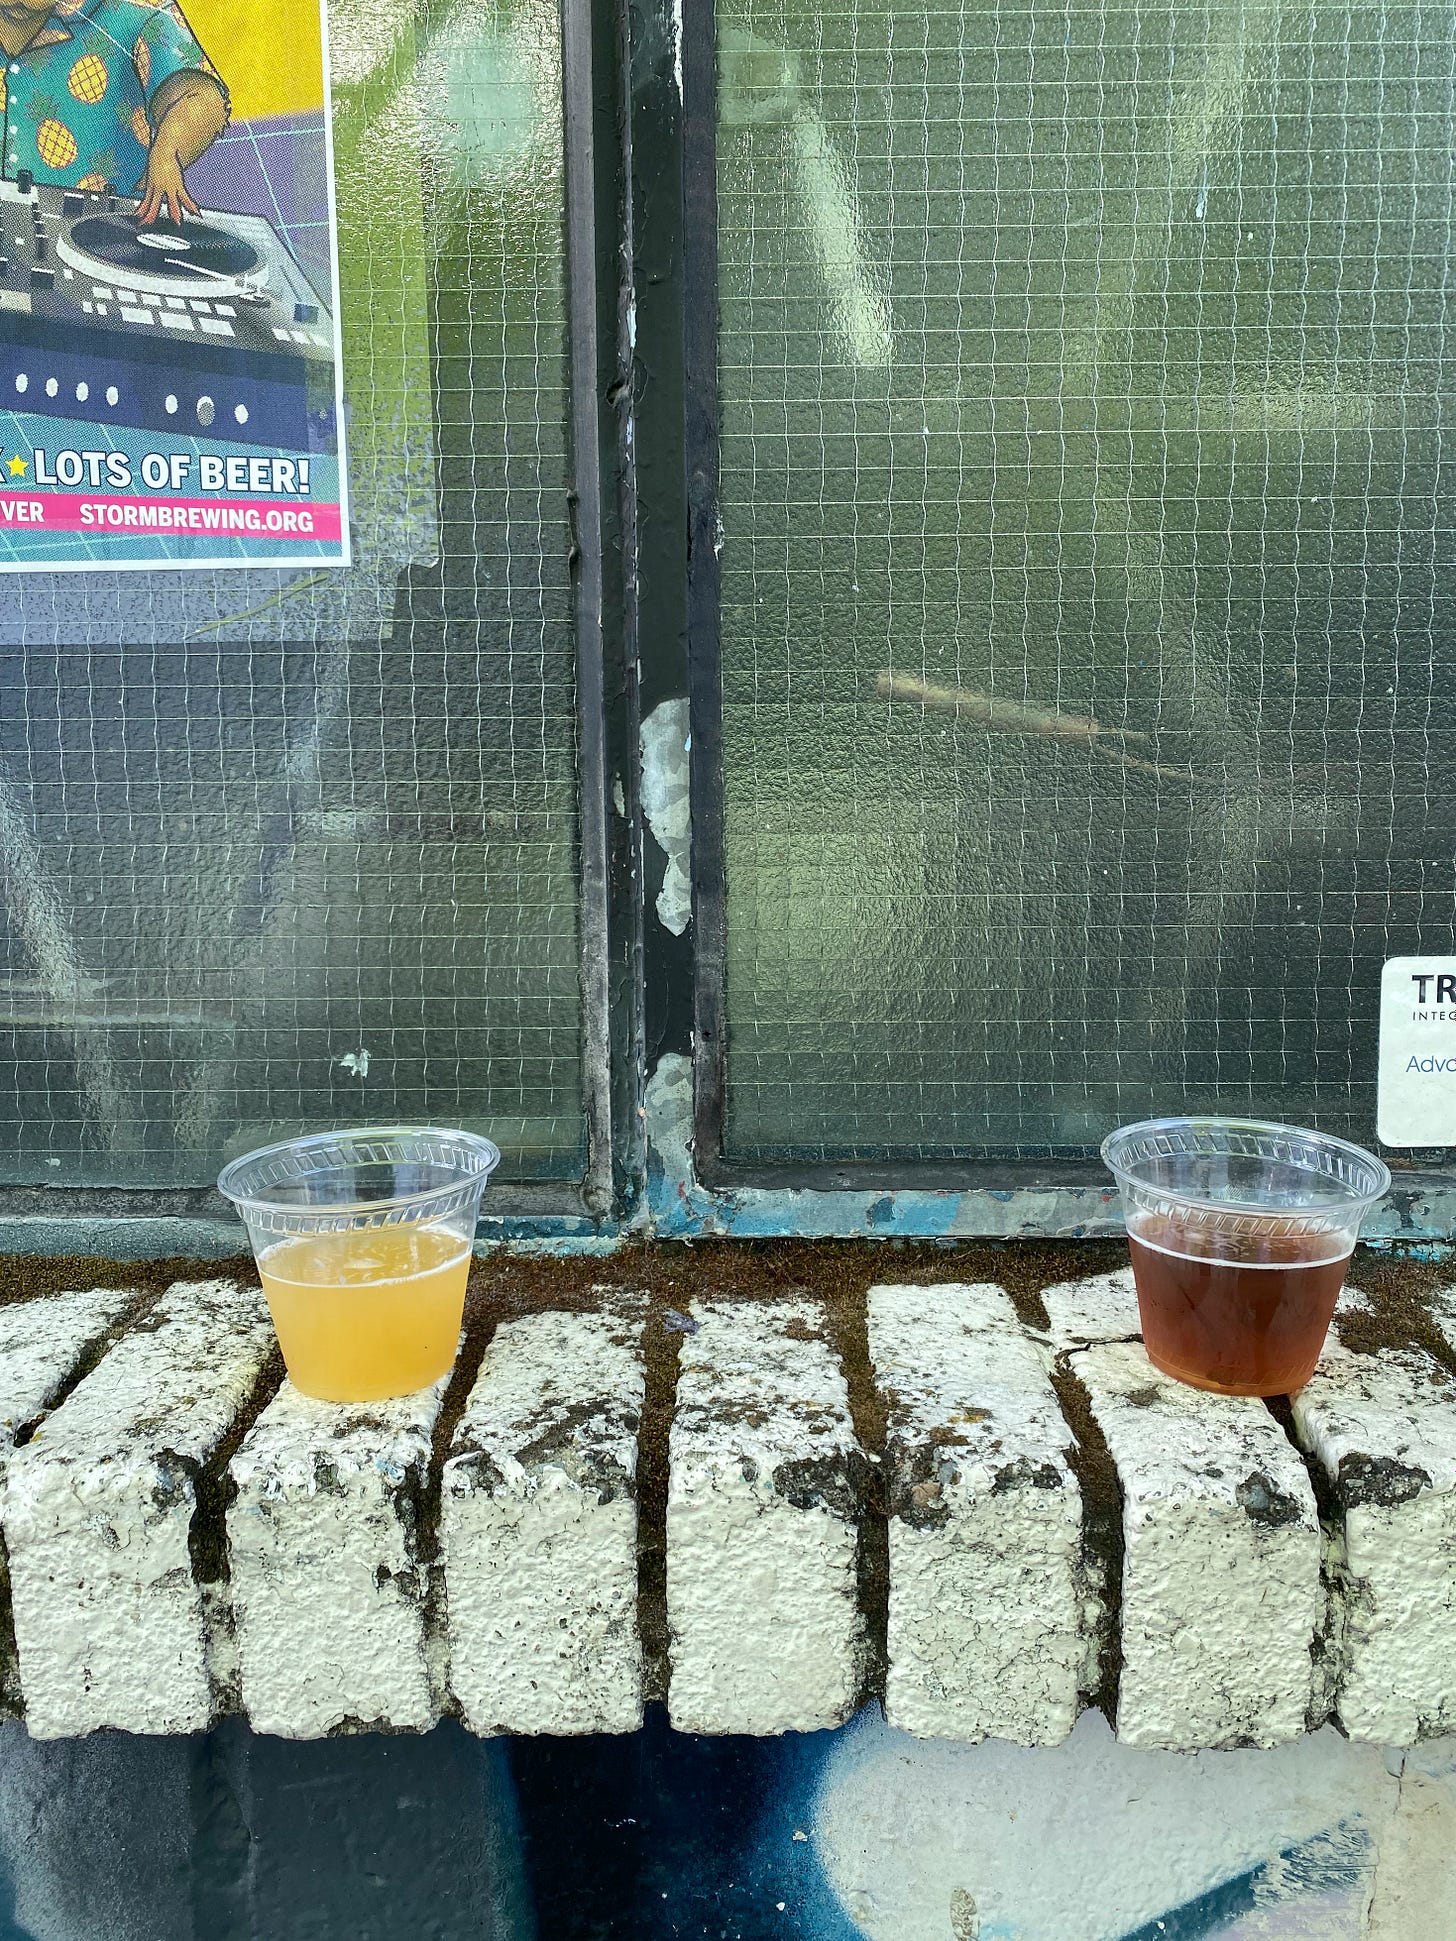 A brick window ledge outside Storm Brewing. The bricks have moss growing in between, and on the window a corner of a poster advertising a party with 'lots of beer!' is visible in the upper left. Two small plastic cups of beer sit on the ledge, one cloudy IPA and one darker ale.